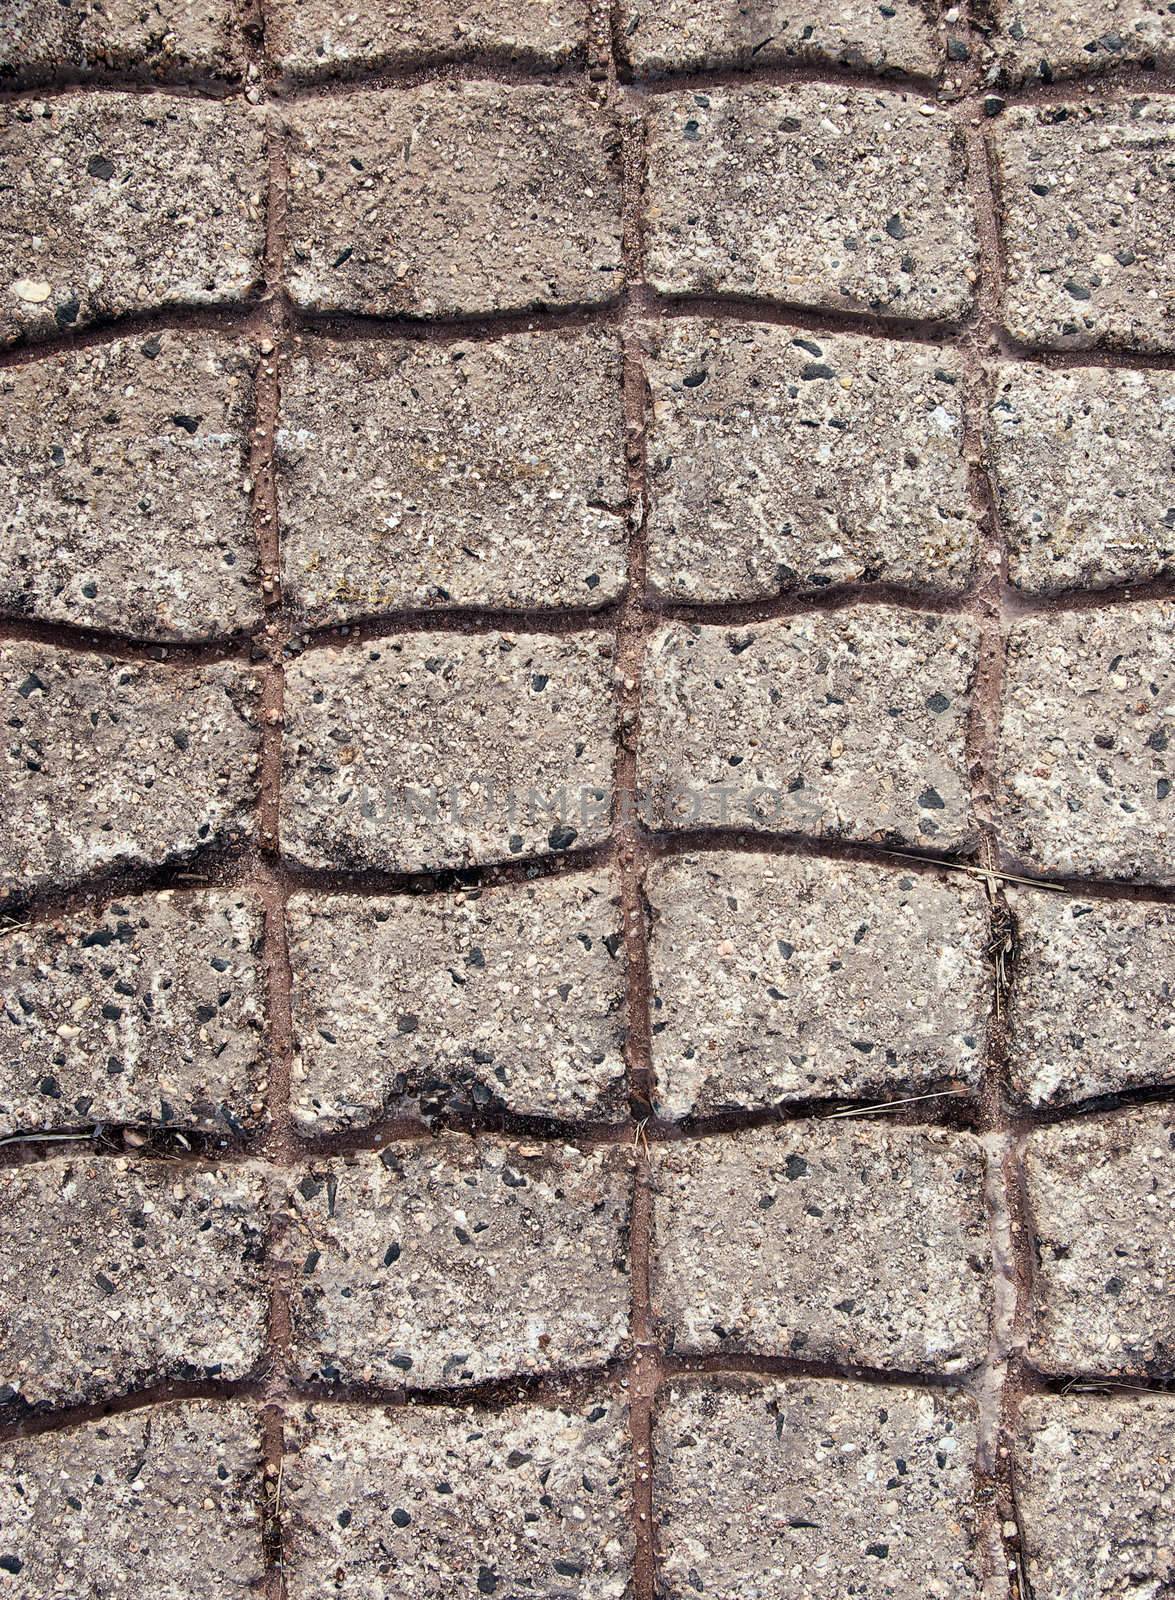 concrete with paved or cobblestone pattern in it